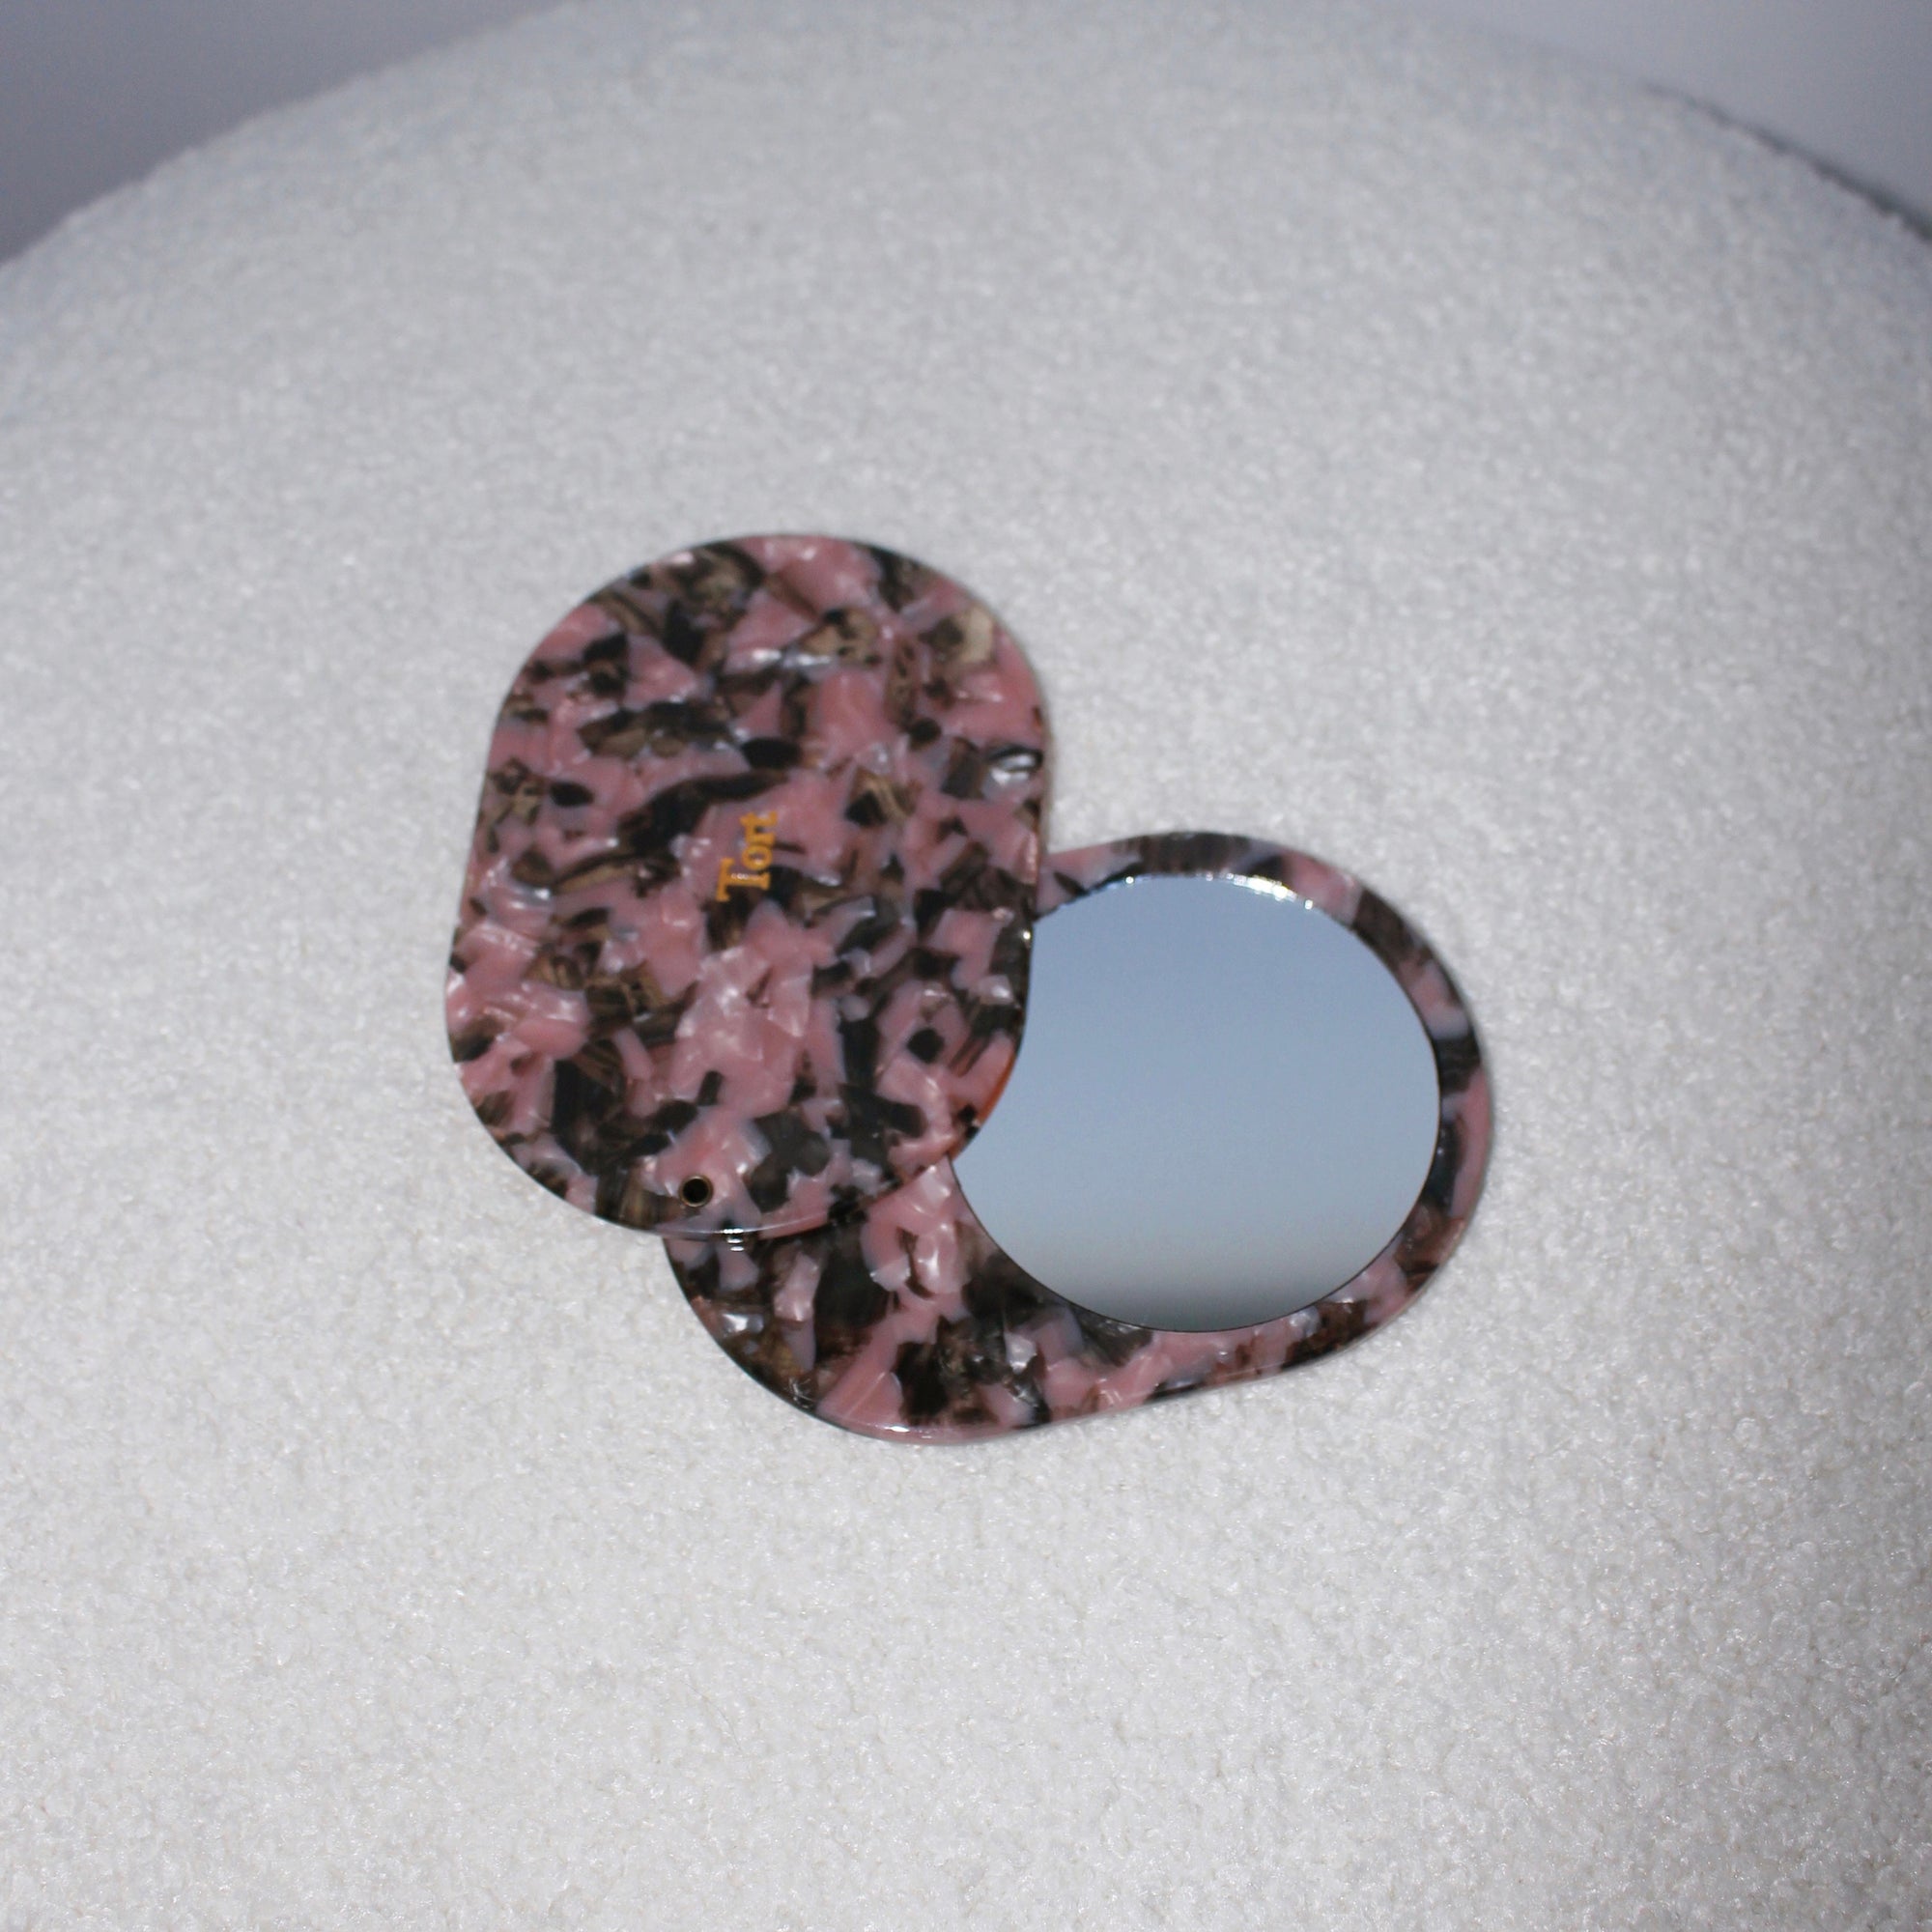 Meet JAYA!  A compact mirror is a handbag essential. Made from smooth, hand-poured eco-resin, the JAYA mirror is super cute with added protection and cleanliness through a sliding mechanism.  Each mirror comes in a branded Tort pouch (colours change seasonally).  Size: 10.5cm  Colour: marbled blush pink and chocolate brown  Material: eco-resin